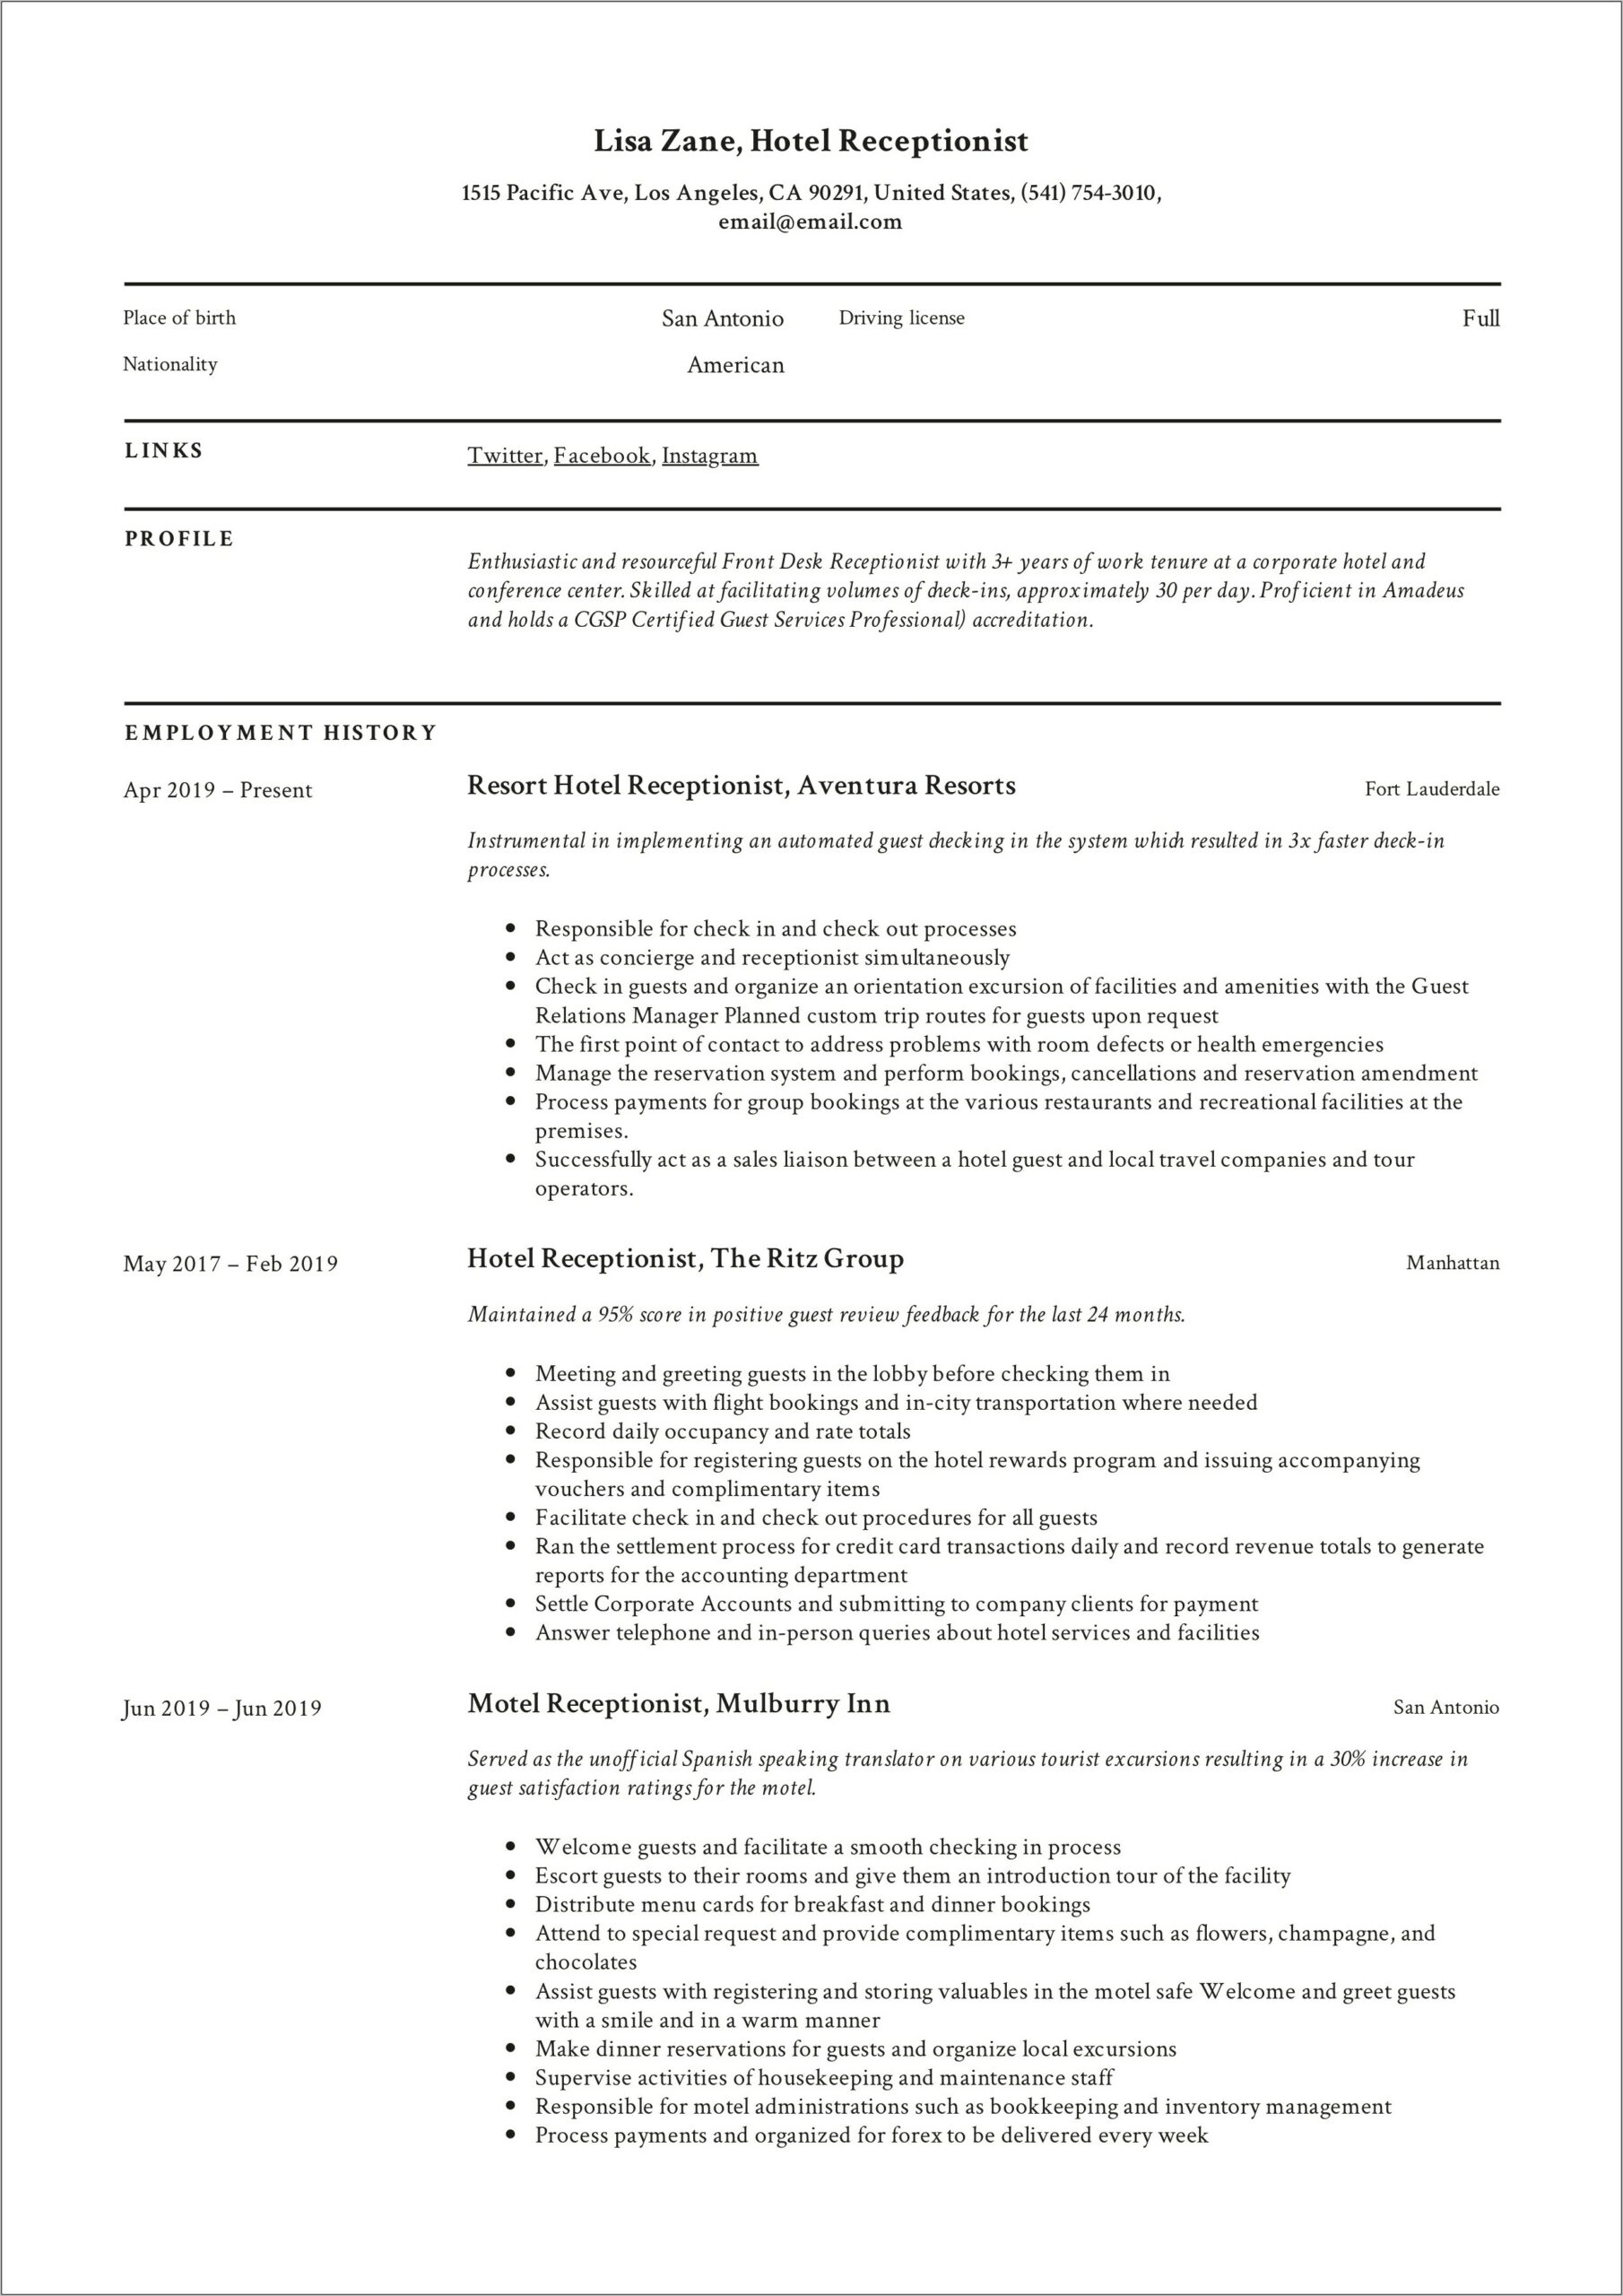 Sample Resume For Receptionist With Experience